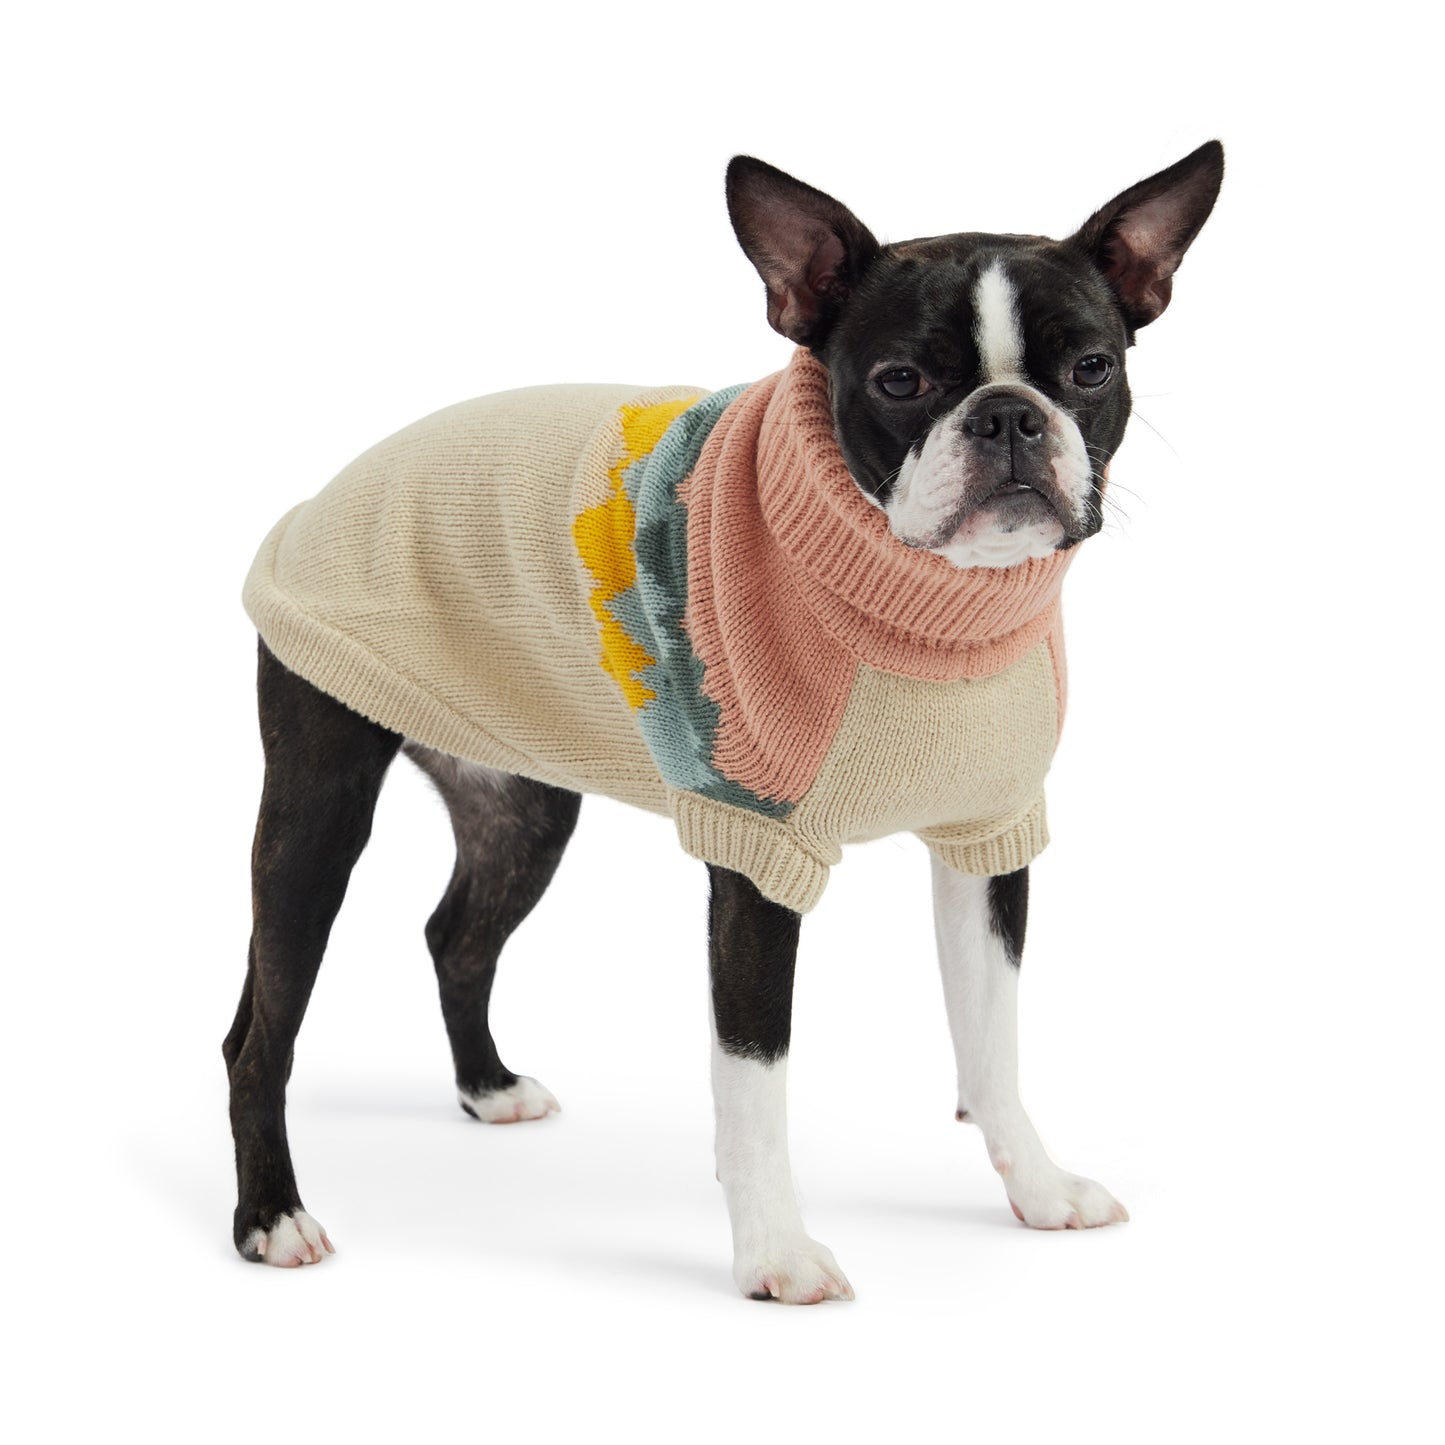 A black and white Boston terrier standing, wearing a beige and pink dog sweater with colorful mountain peaks graphic